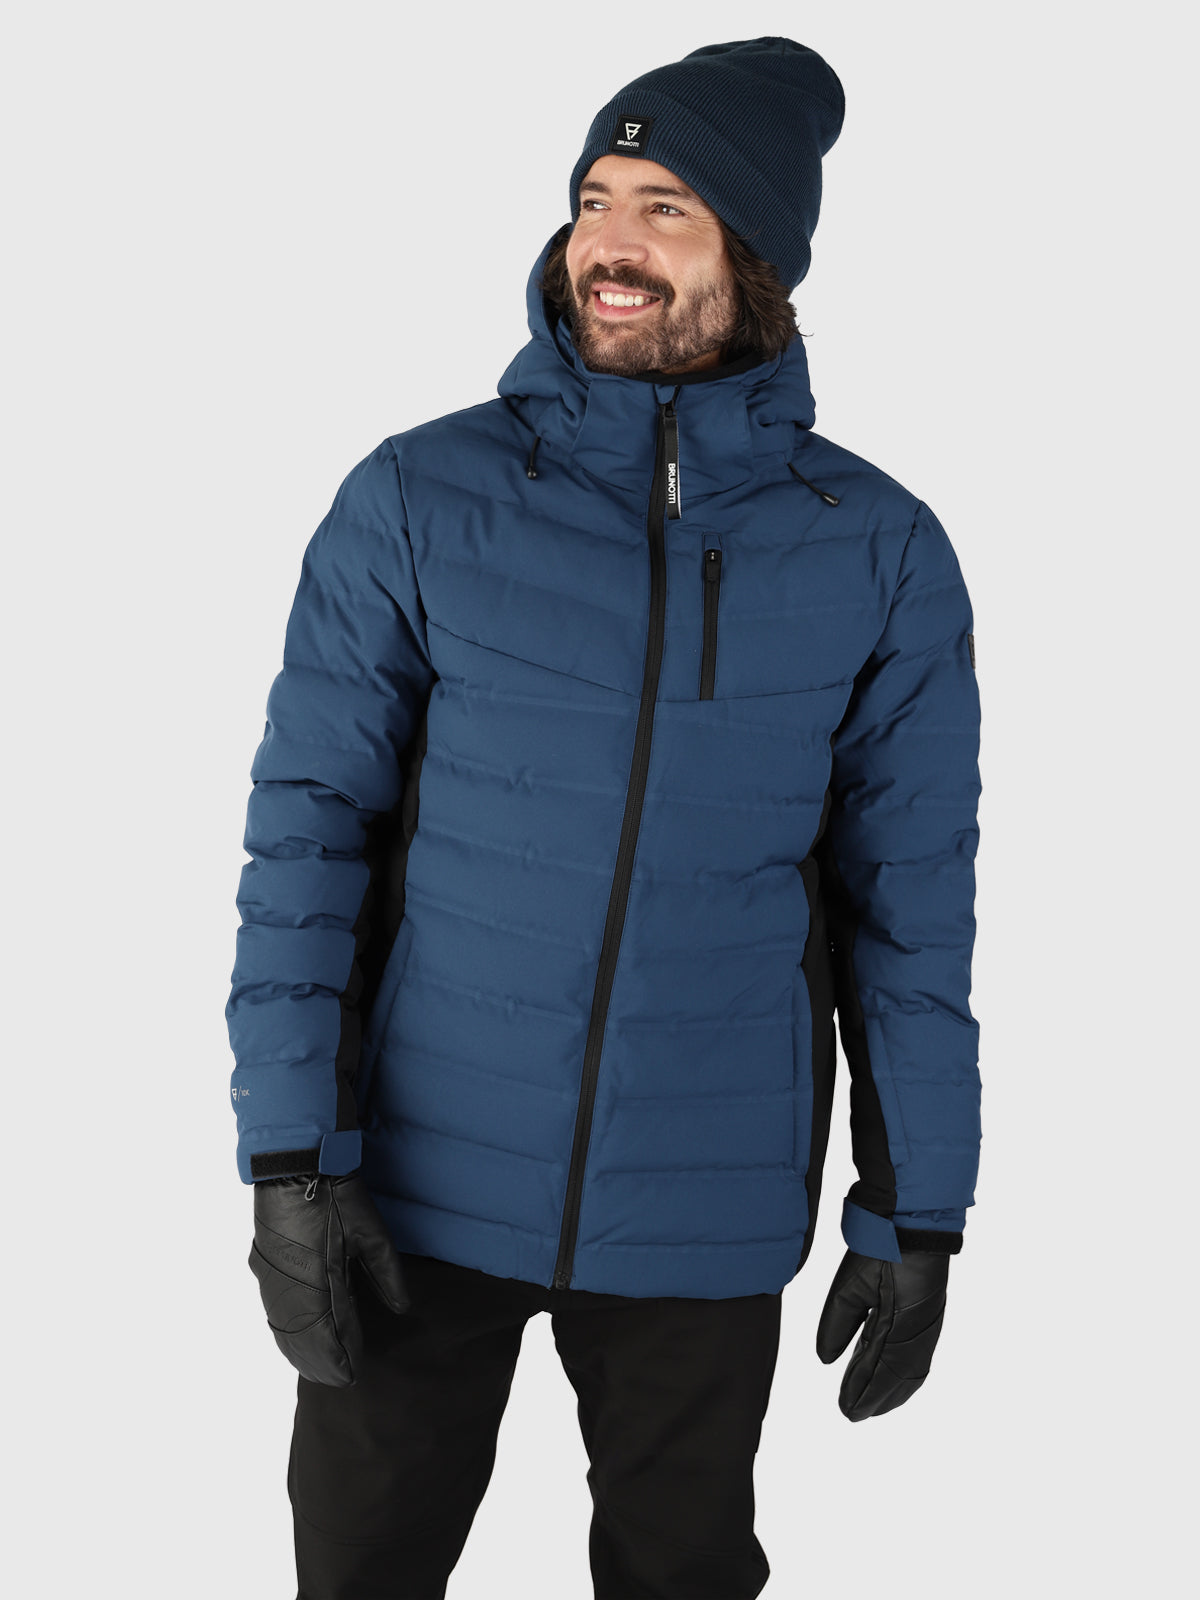 Sports Winter Clothing & Accessories